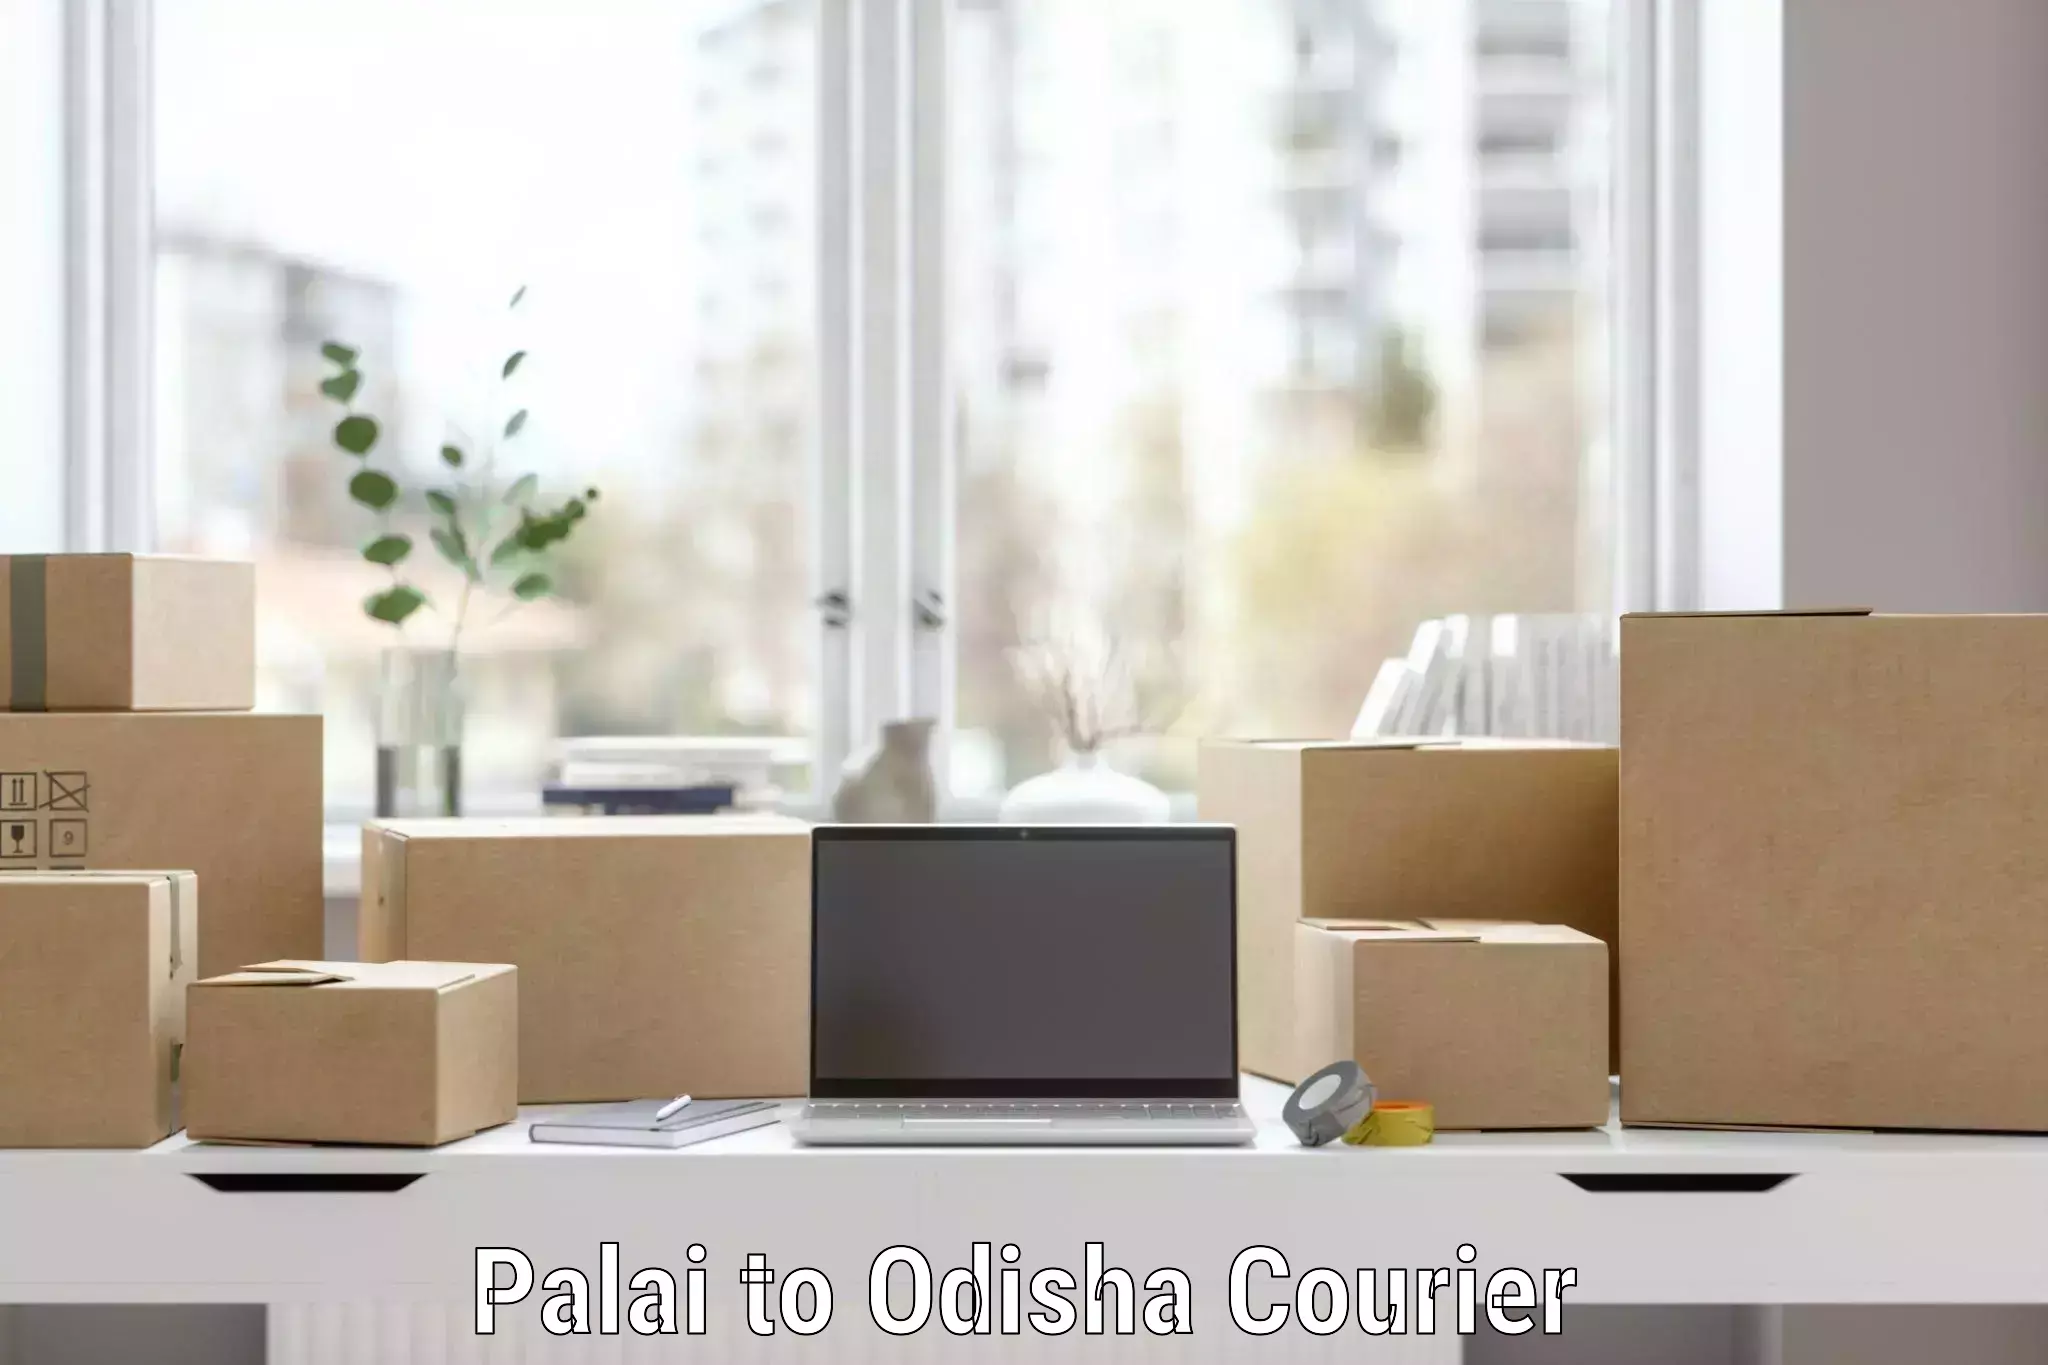 Quality relocation services in Palai to Bhuban